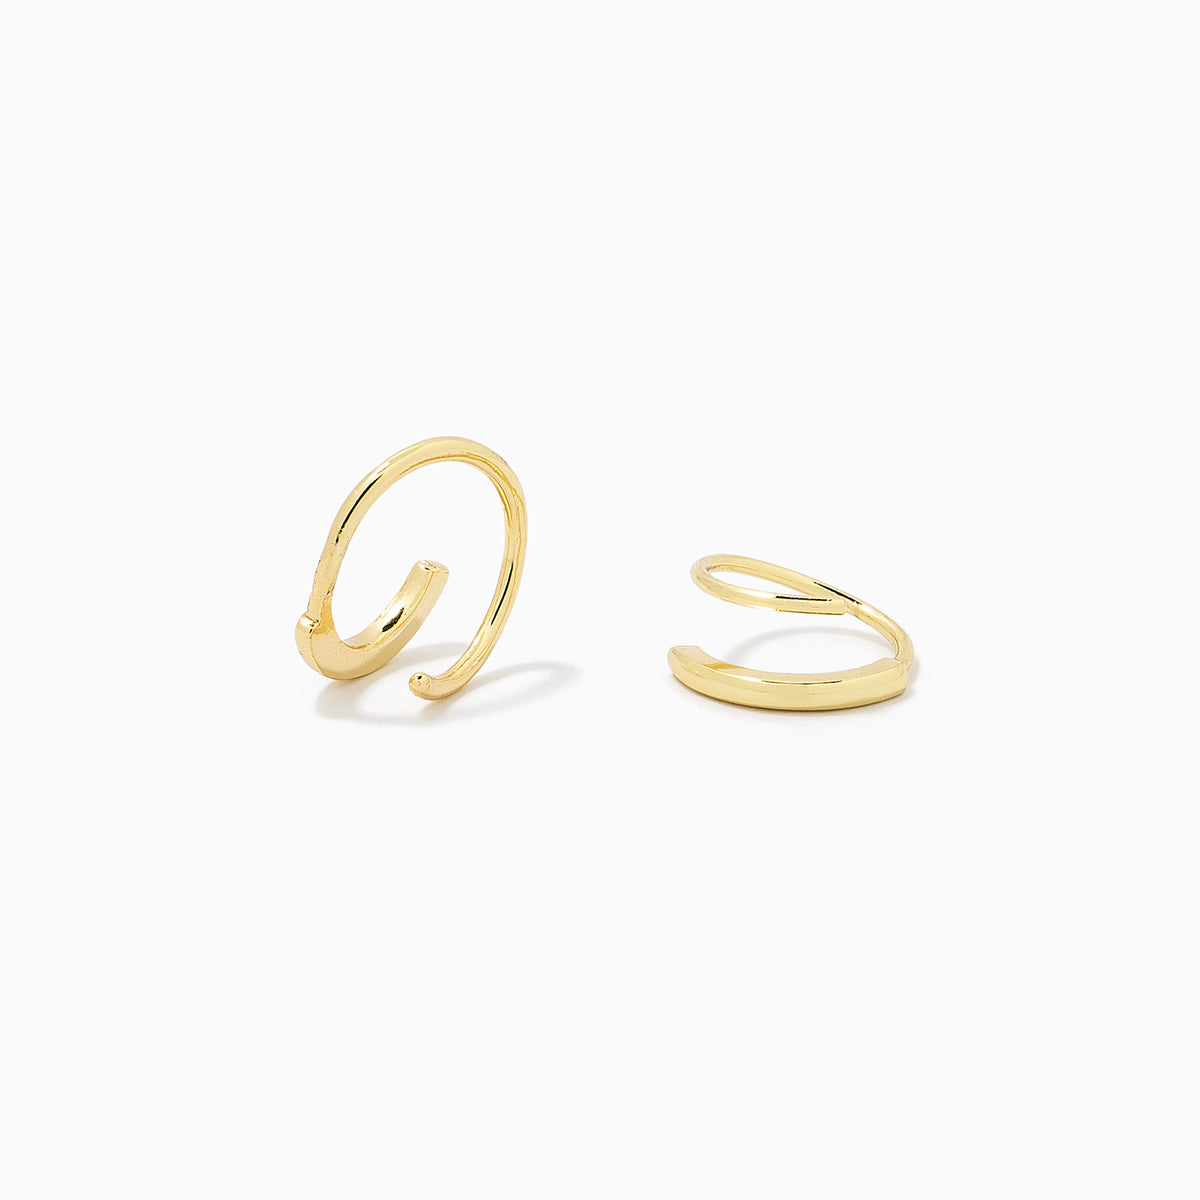 Seeing Double Earrings | Sold Gold | Product Detail Image | Uncommon James